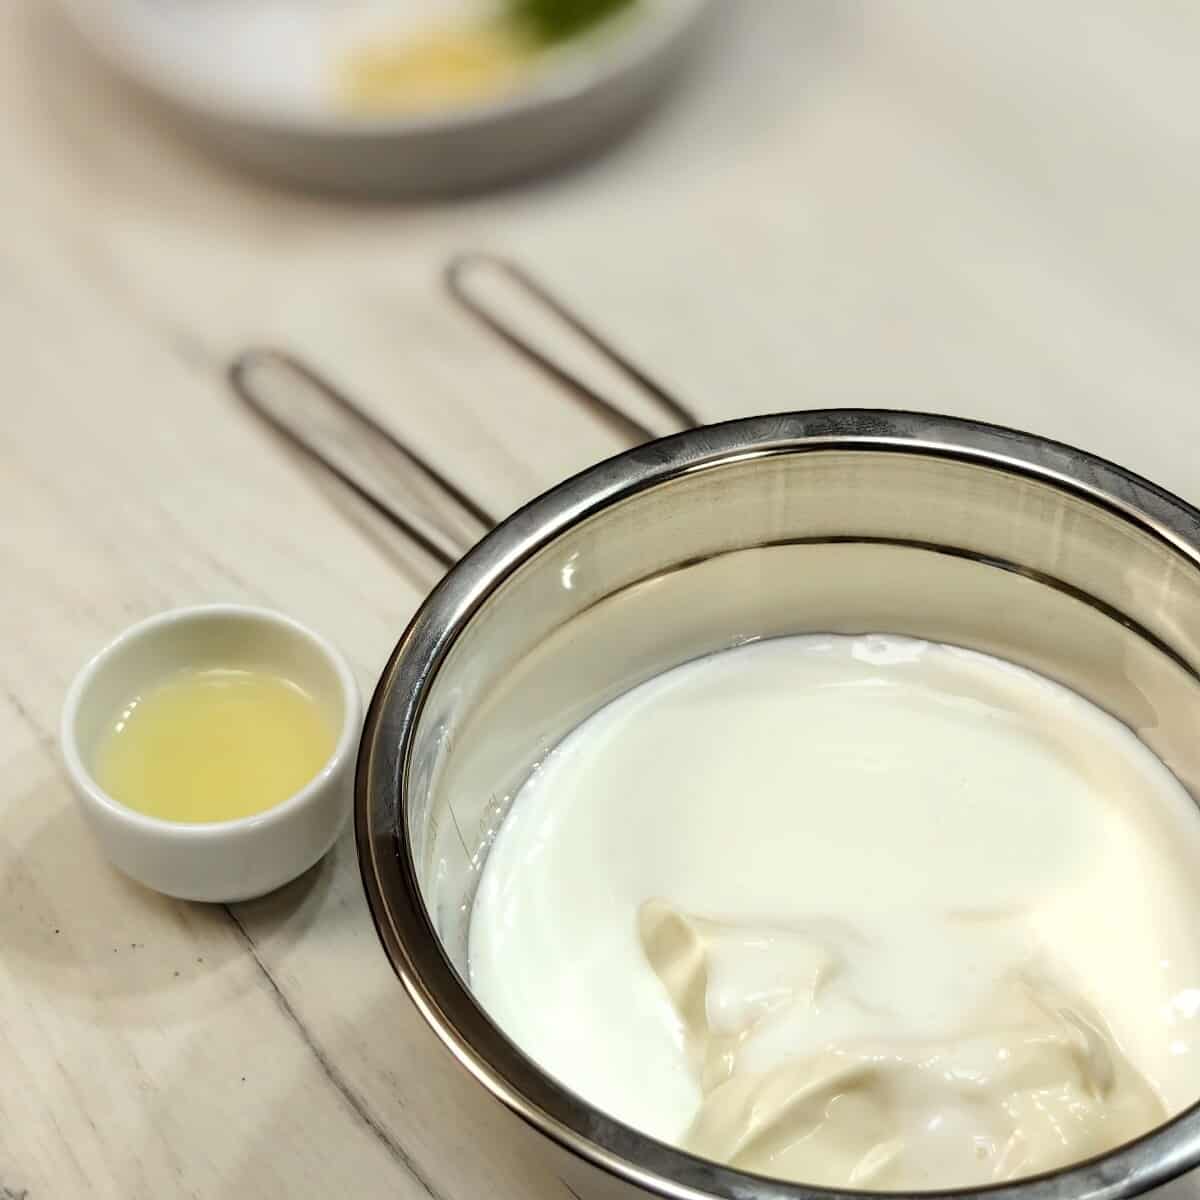 mayonnaise in a mixing bowl and lemon juice